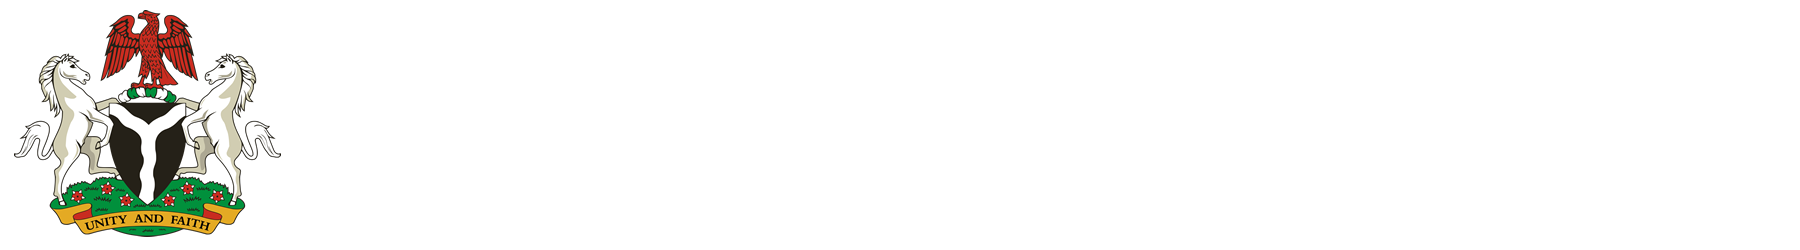 Embassy of Nigeria to Ethiopia, Djibouti, and Permanent Mission of the Federal Republic of Nigeria to the African Union and UNECA  |  This is a platform where you can find all information about Nigeria, its economy, culture, tourism and more. You can also sort for details of African Union and UNECA at large..